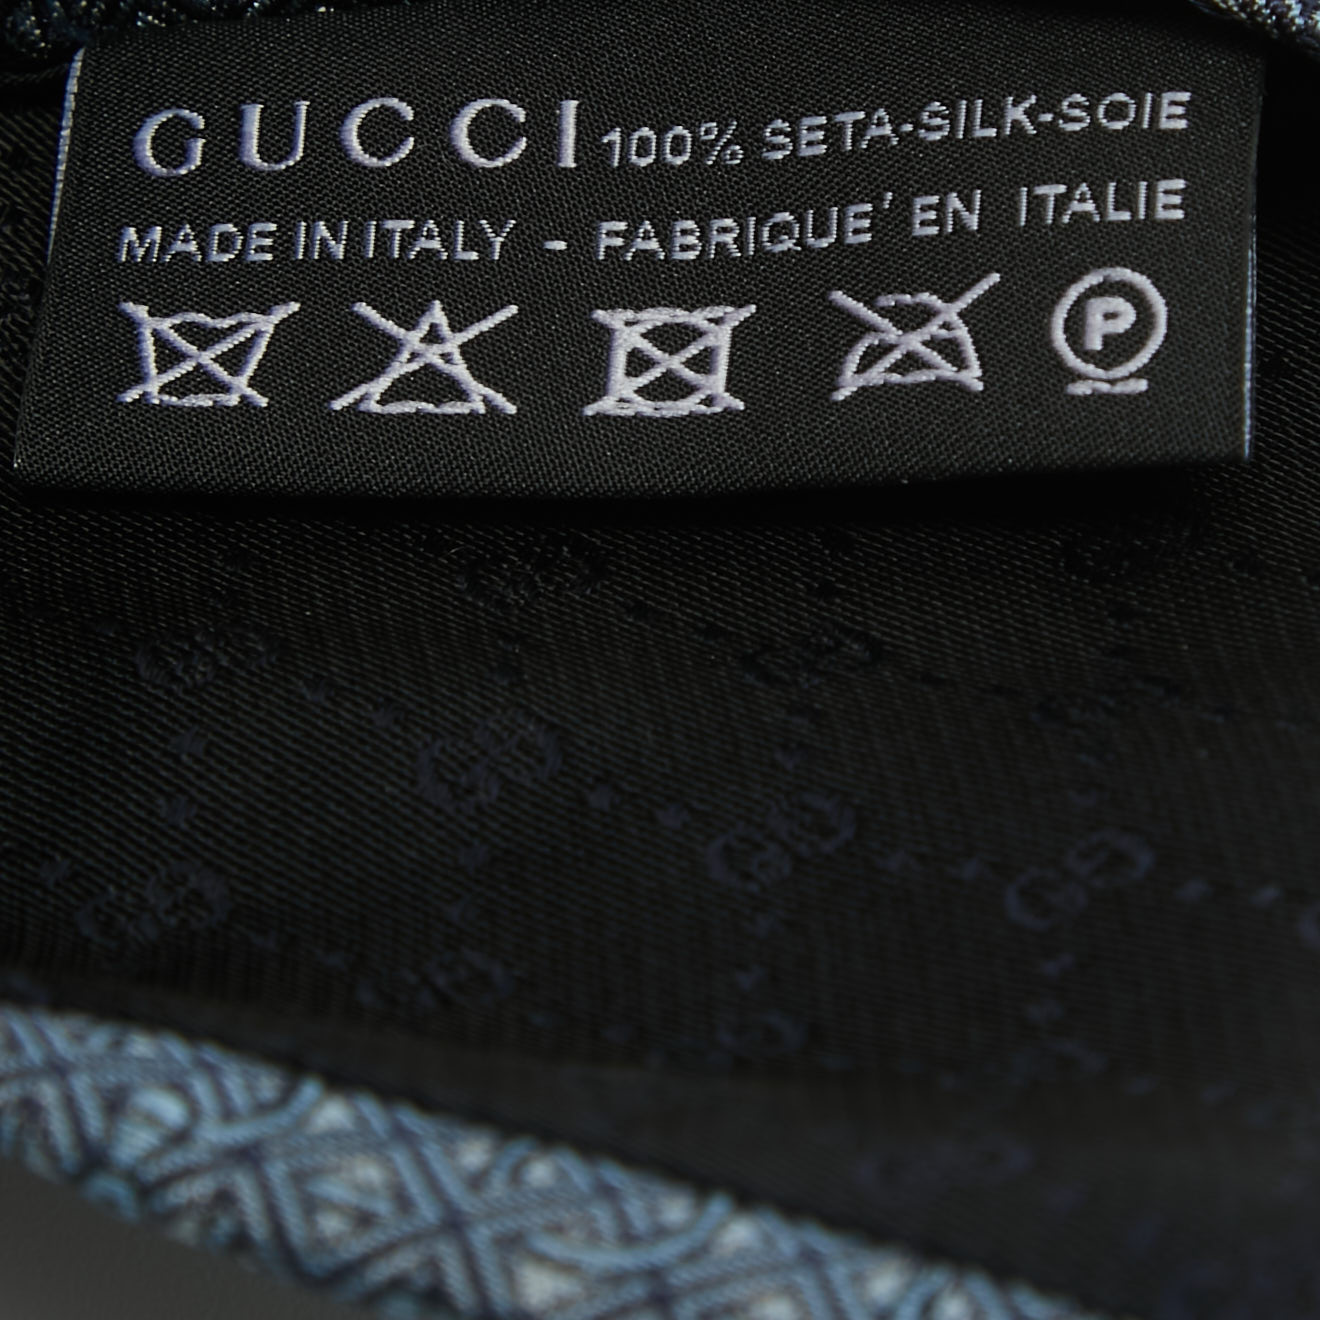 Gucci Blue Patterned Silk Tie